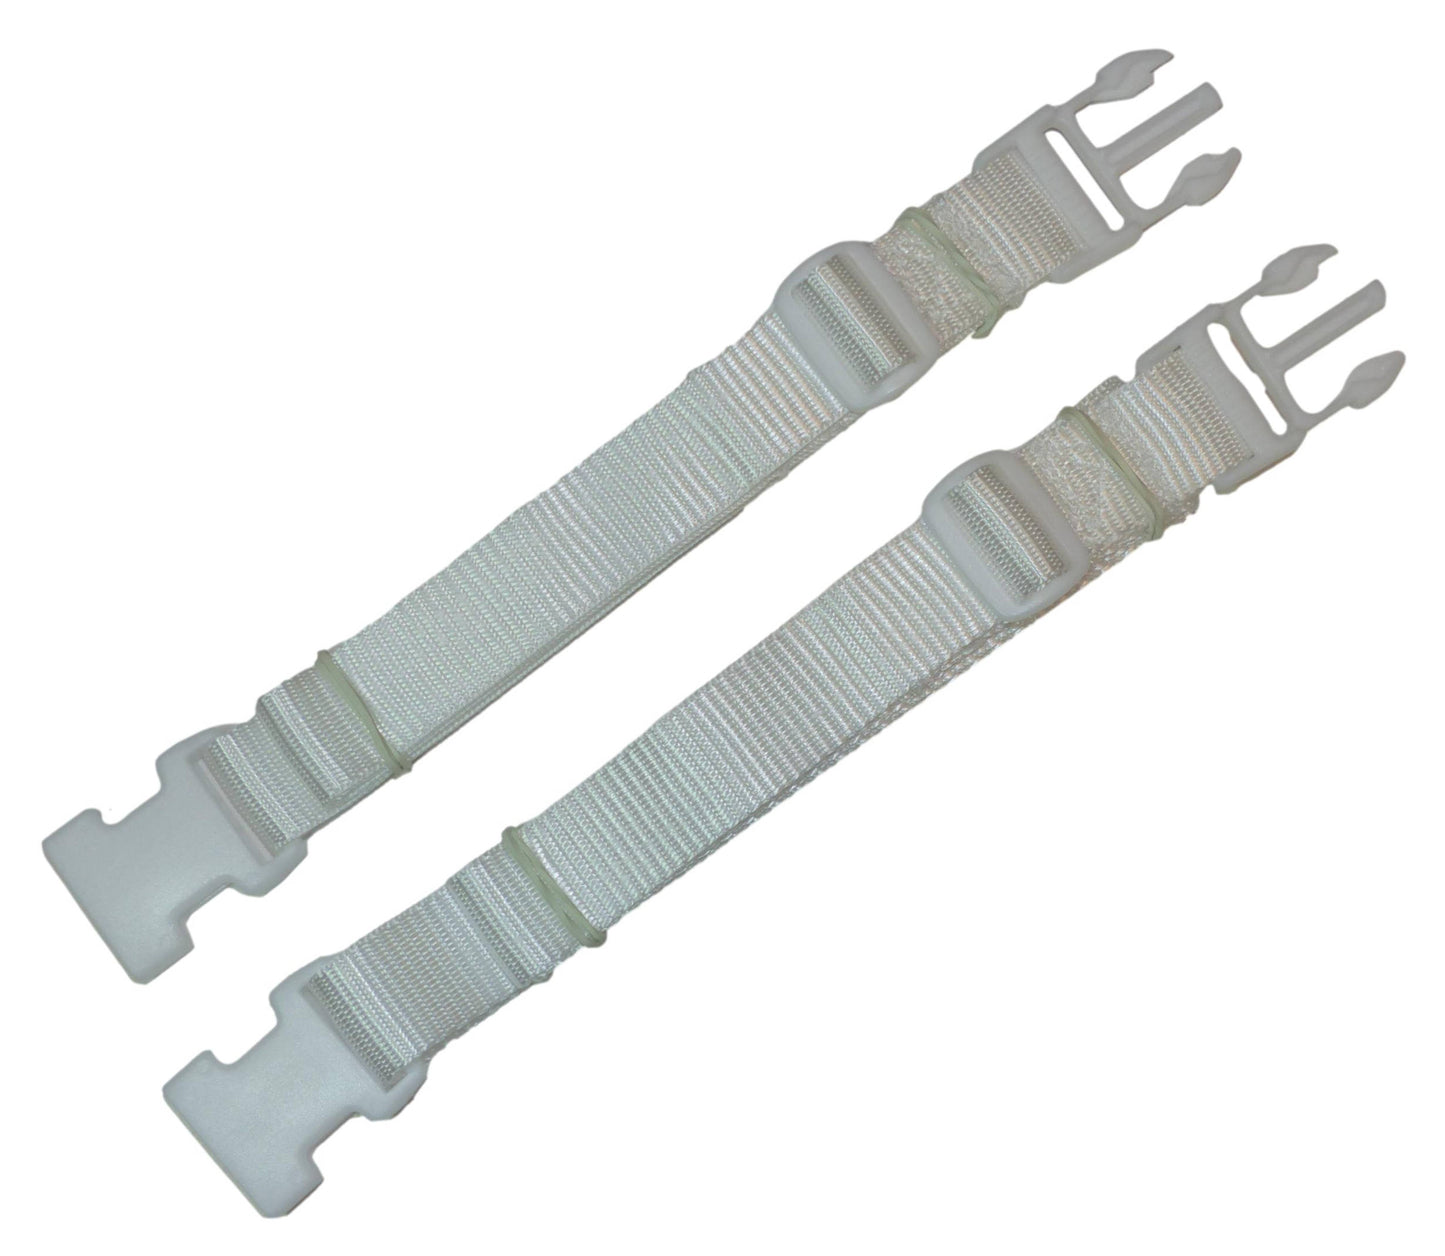 25mm Webbing Strap with Quick Release & Length-Adjusting Buckles (Pair) in white